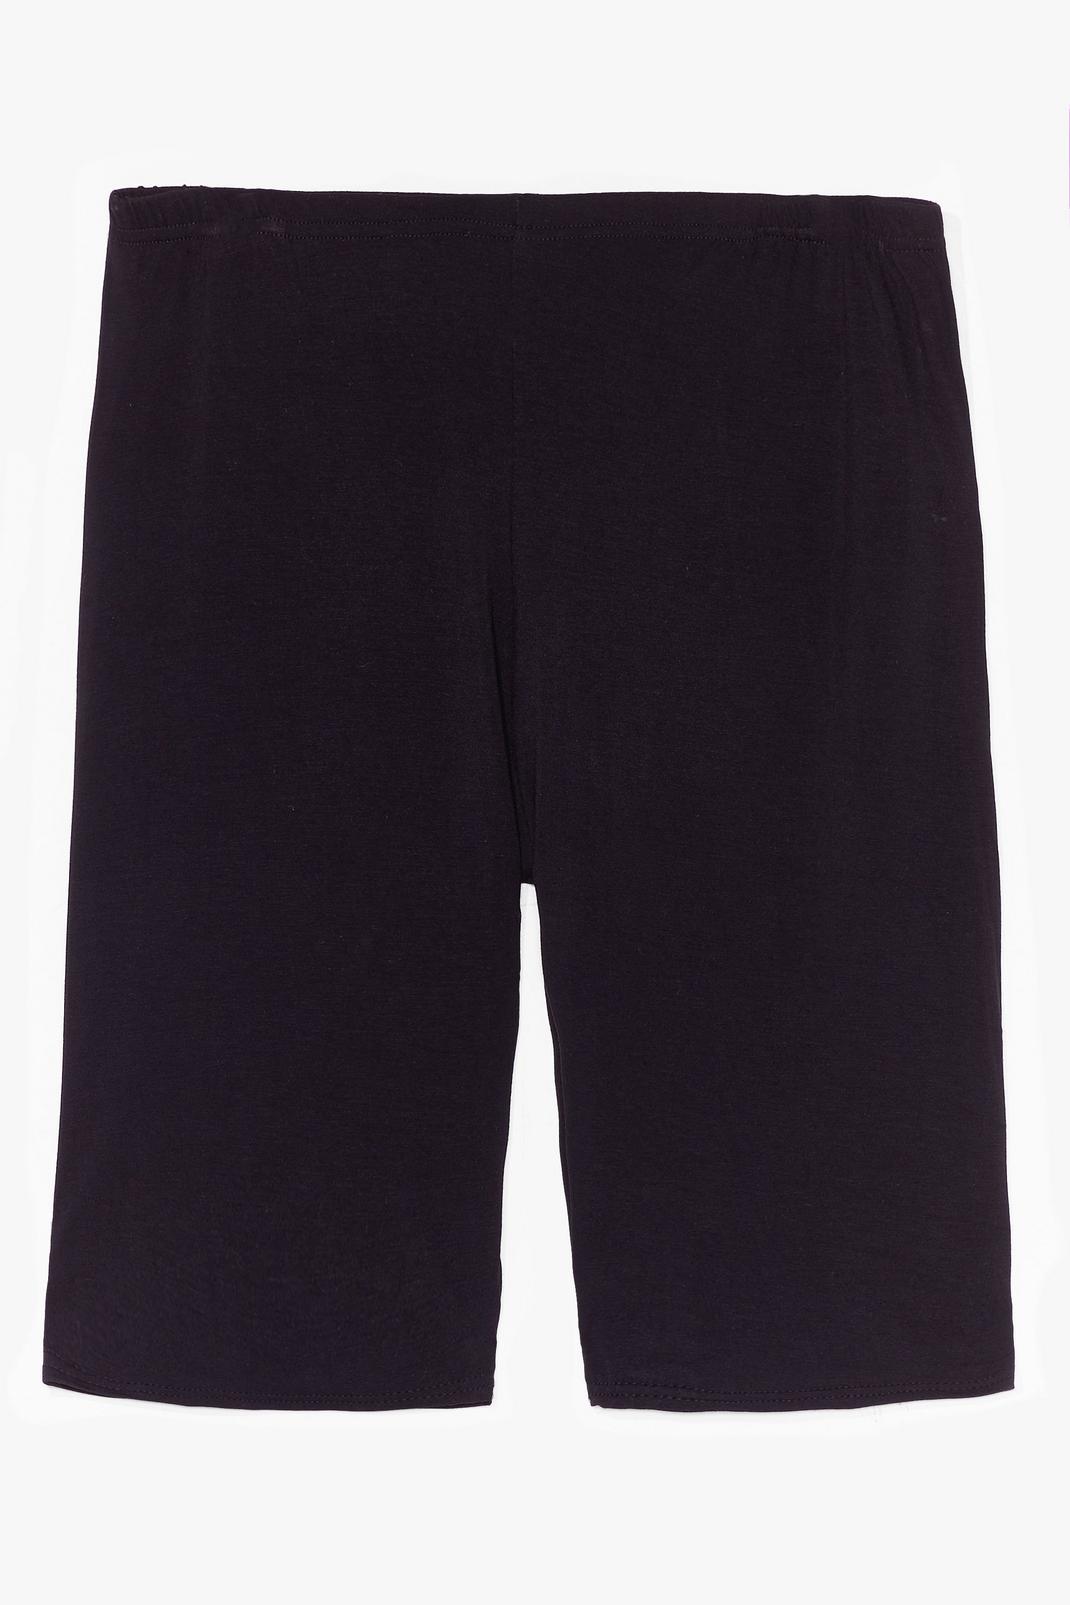 Black Plus Size Stretchy Longline Cycling Shorts image number 1